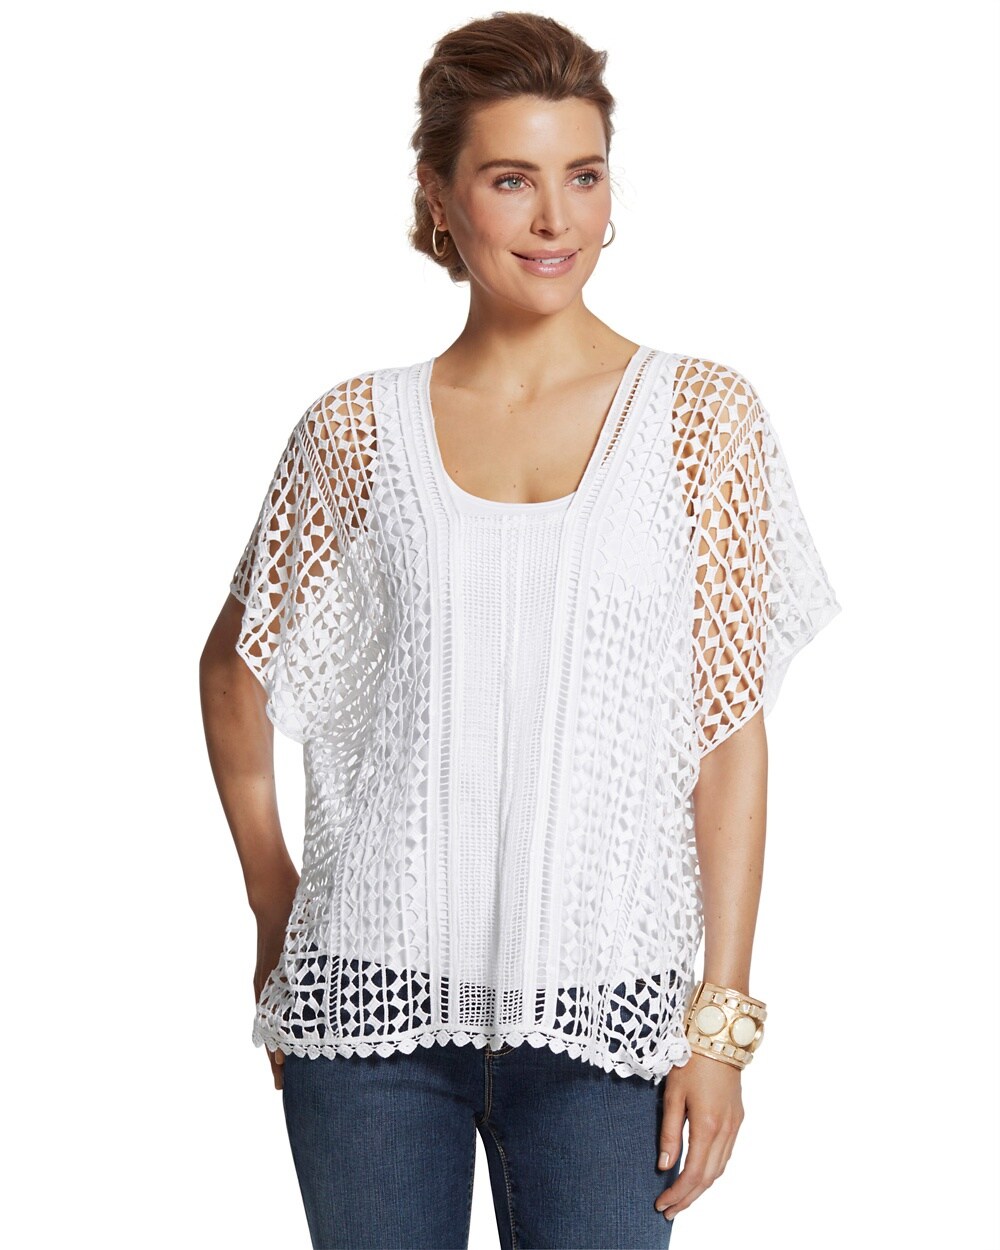 Alex Crocheted Poncho - Women's New Clothing - Tops, Bottoms ...